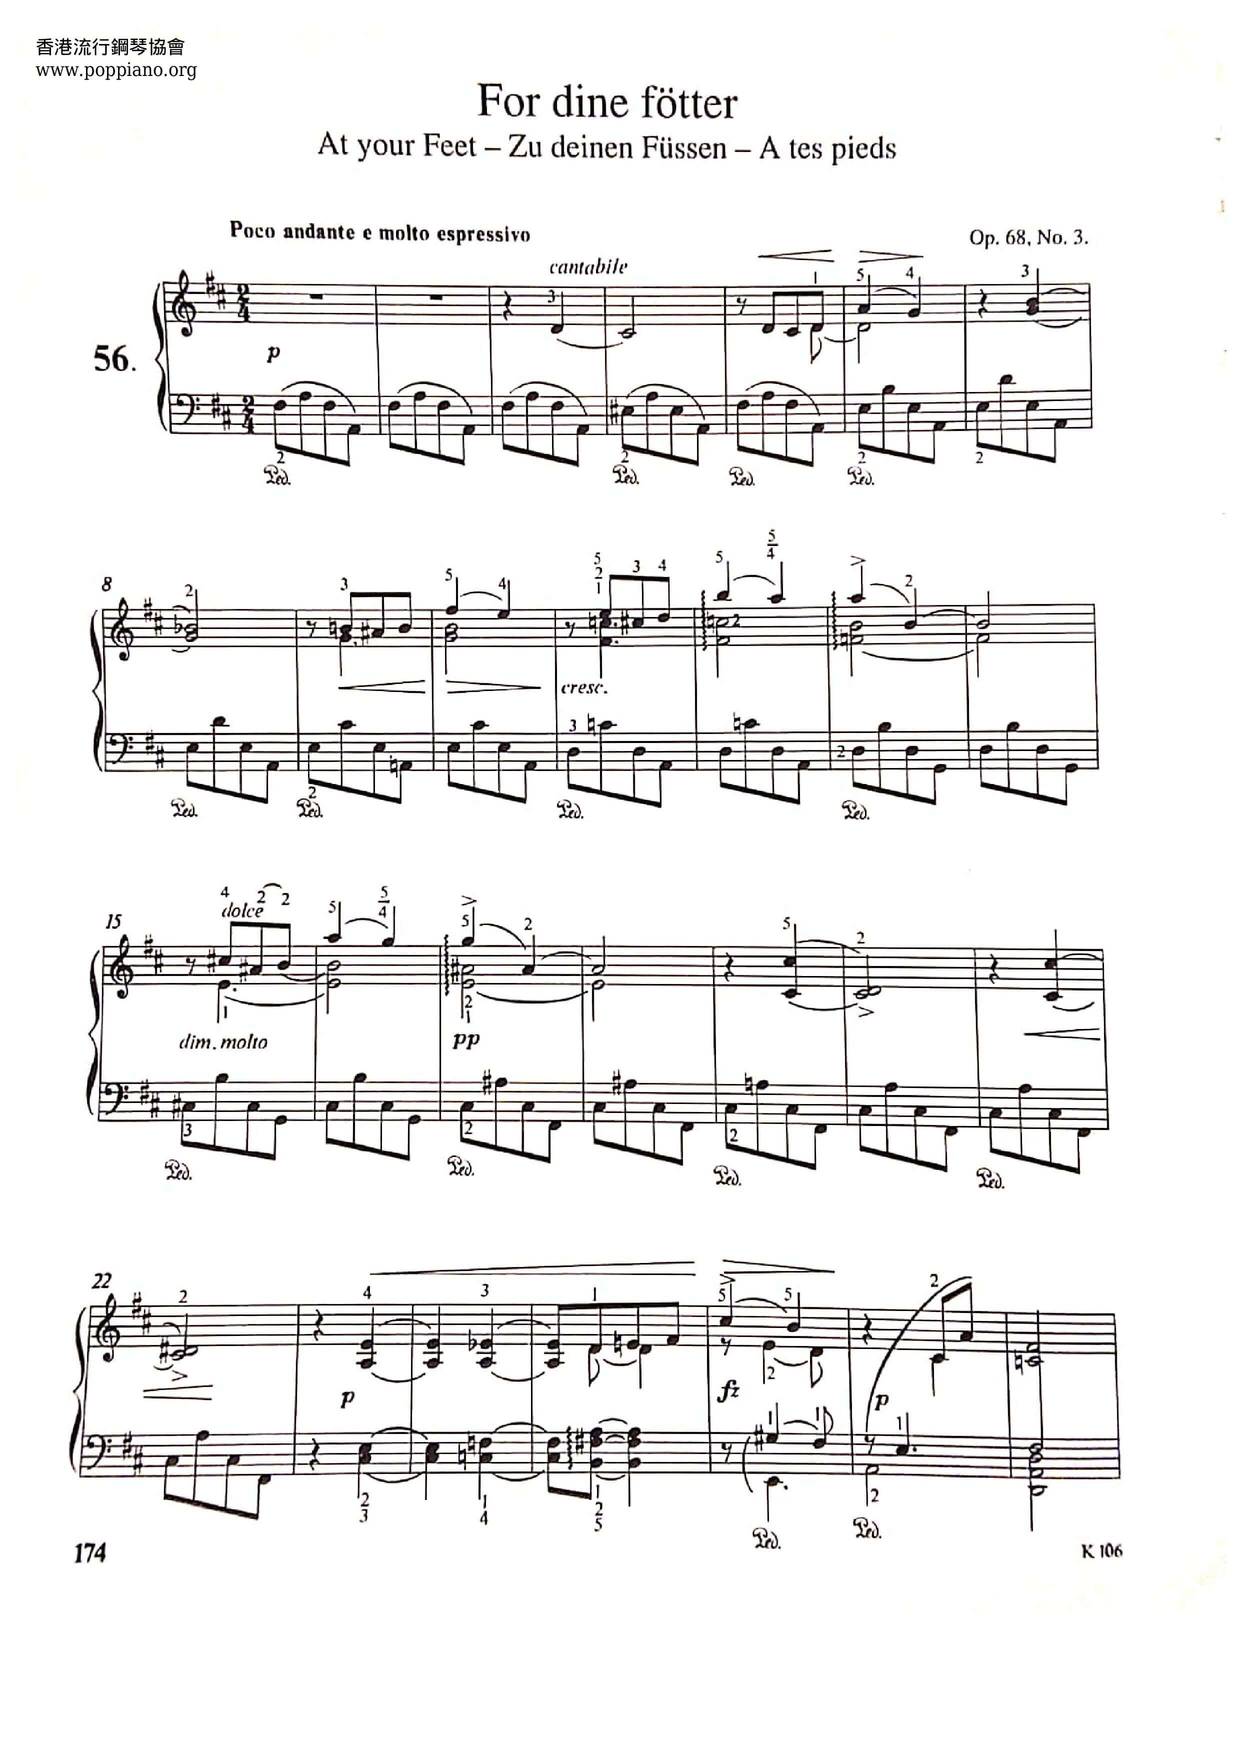 At Your Feet, Op.68 No.3 Score